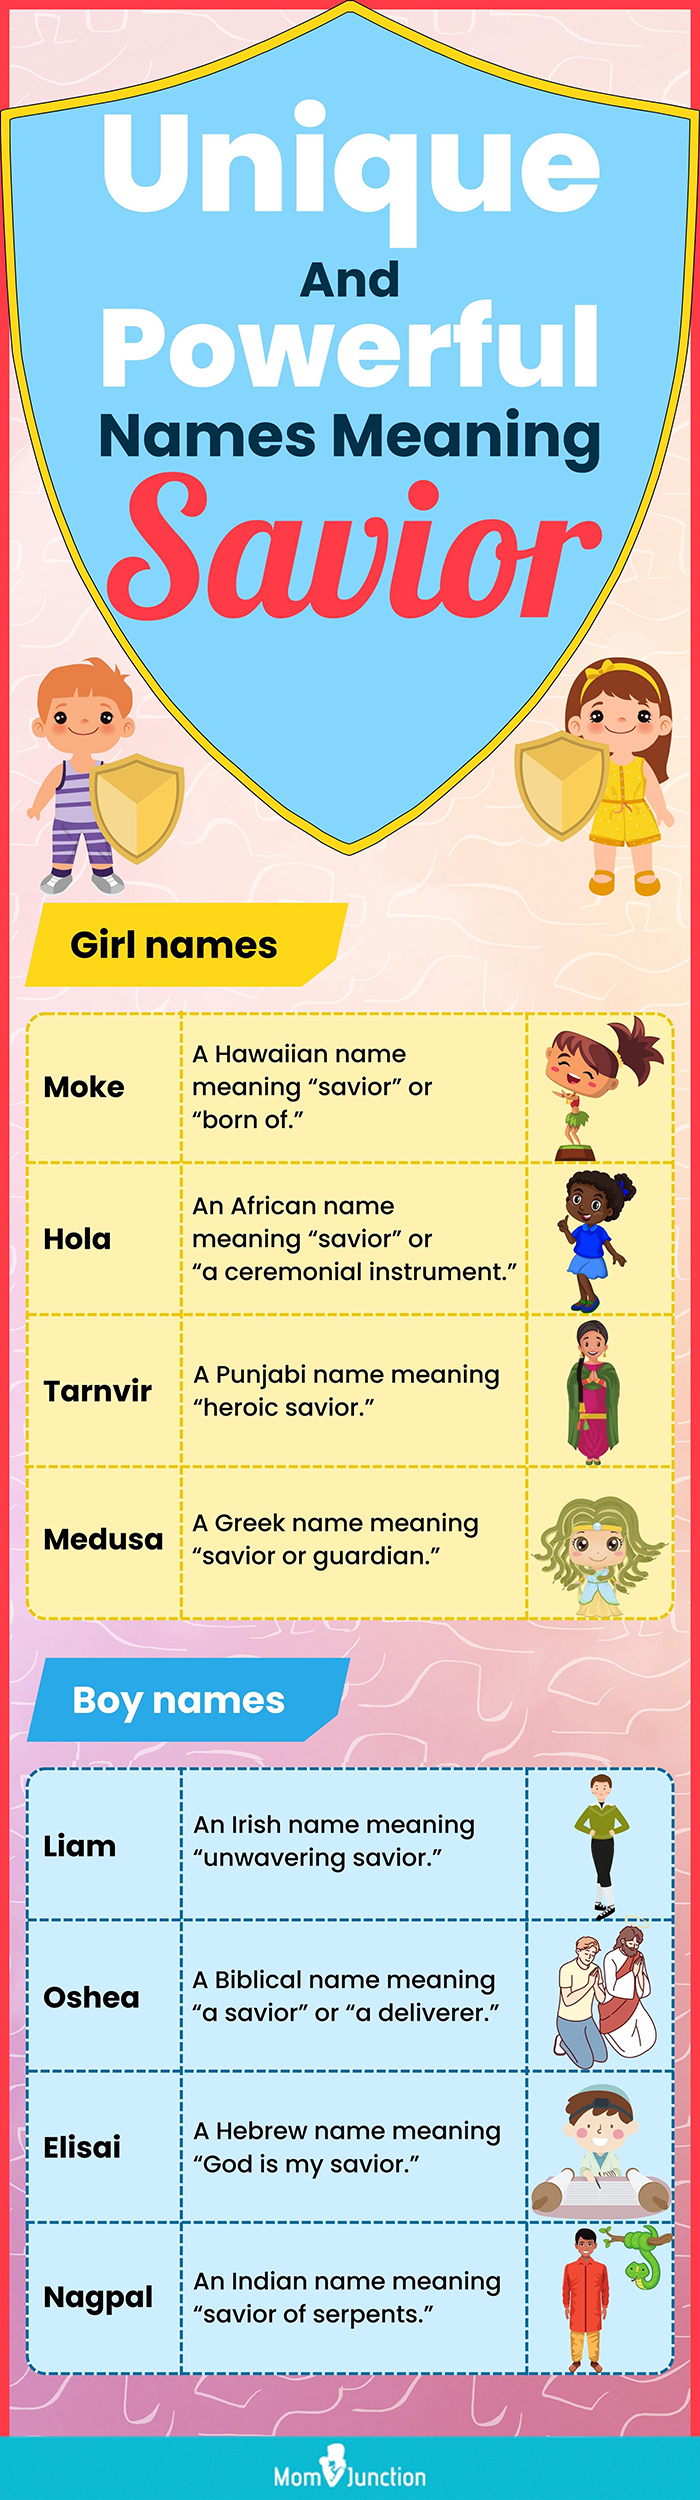 unique and powerful names meaning savior (infographic)